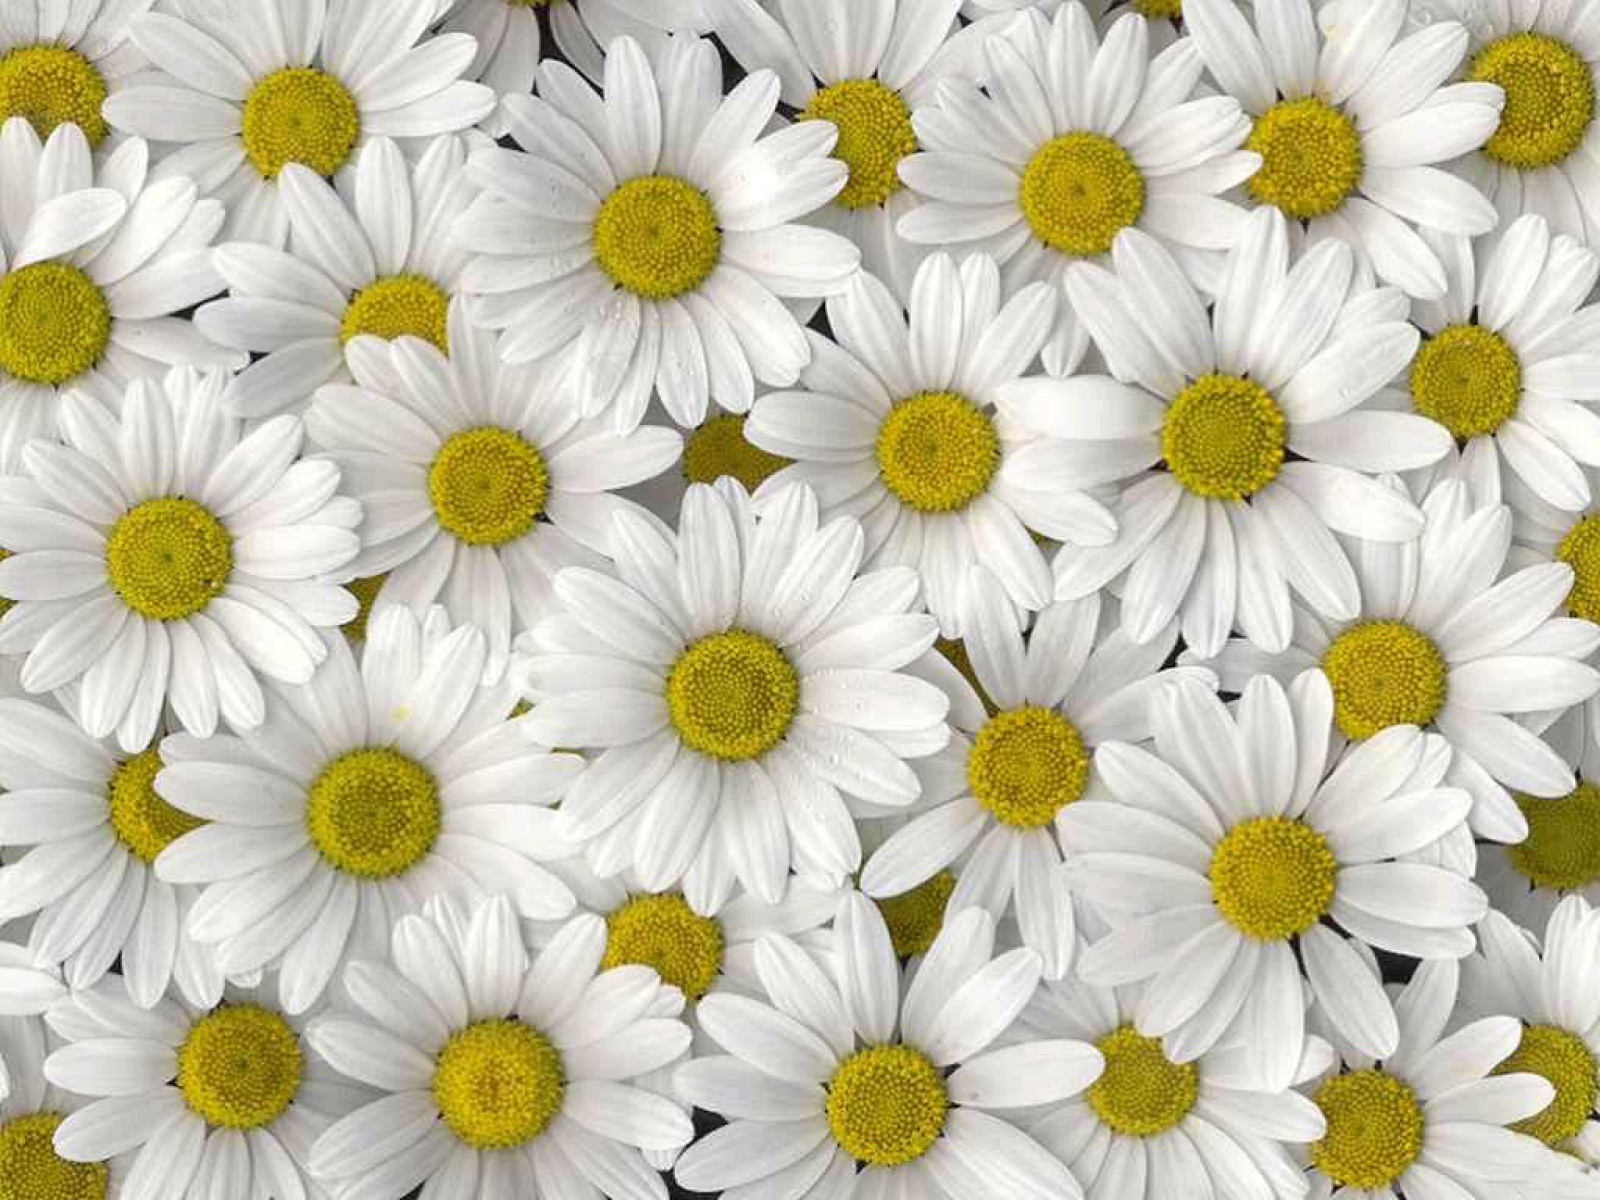 static ws white daisies high definition wallpaper White Daisies HD Wallpapers